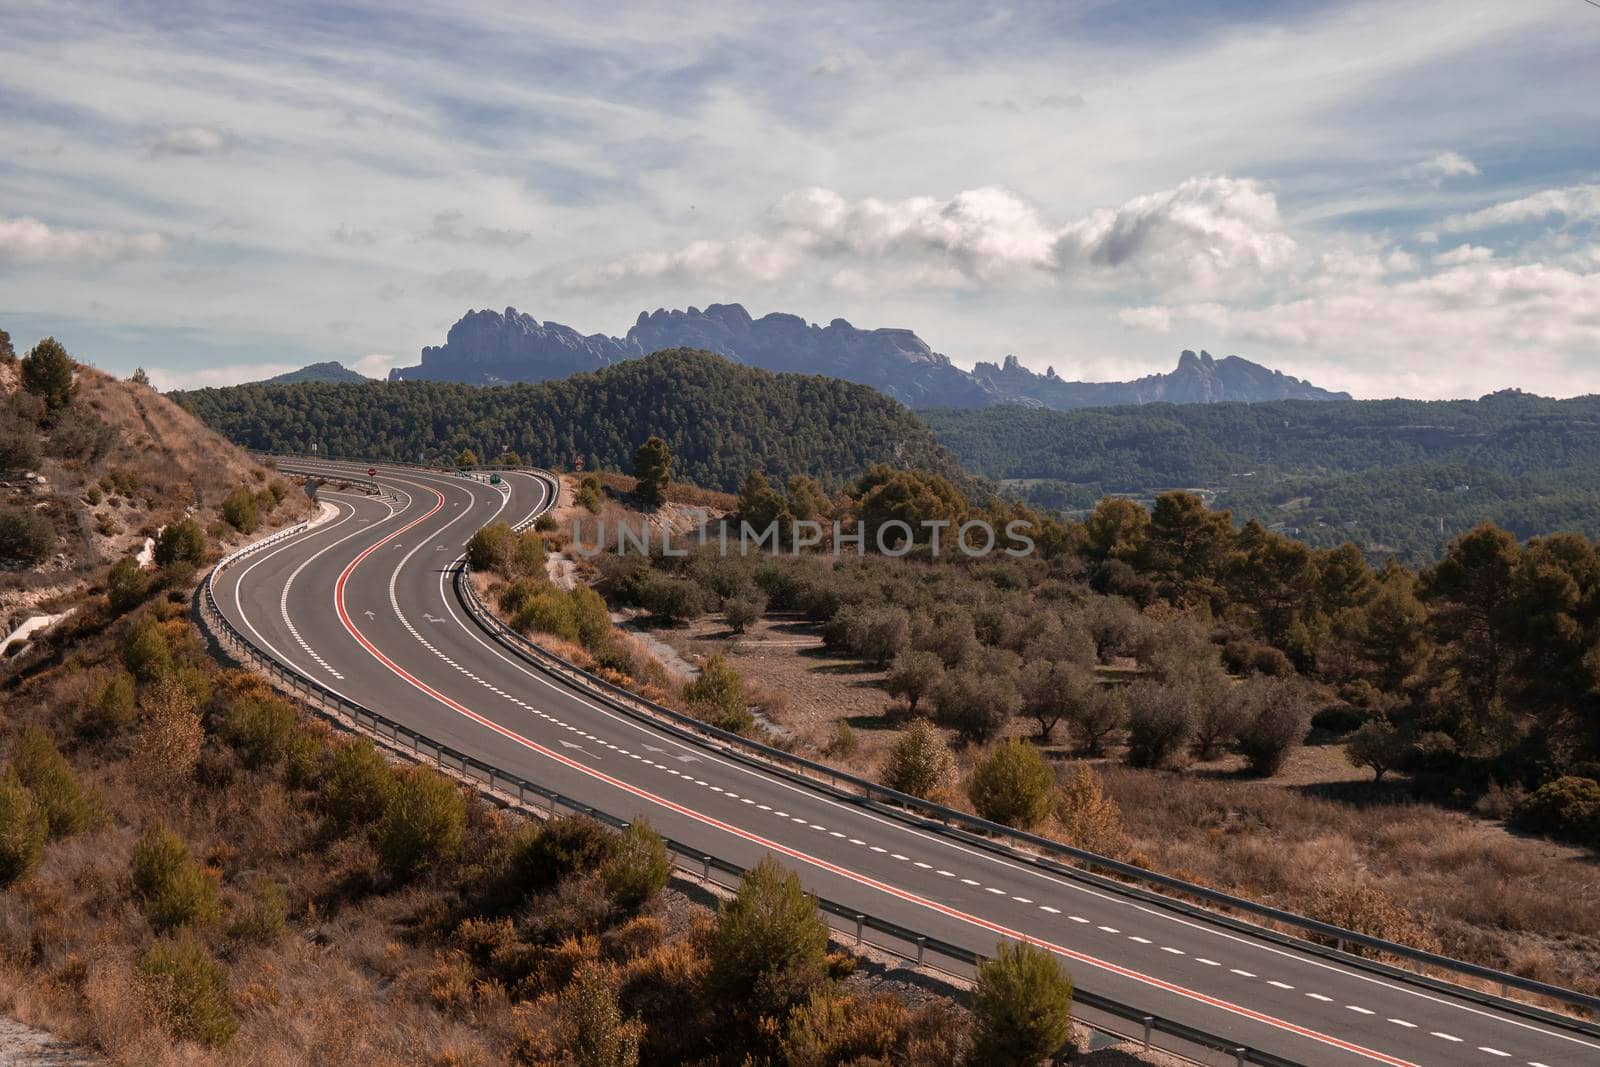 Curved road and Montserrat mountain in the background in a landscape under a cloudy sky in Catalonia